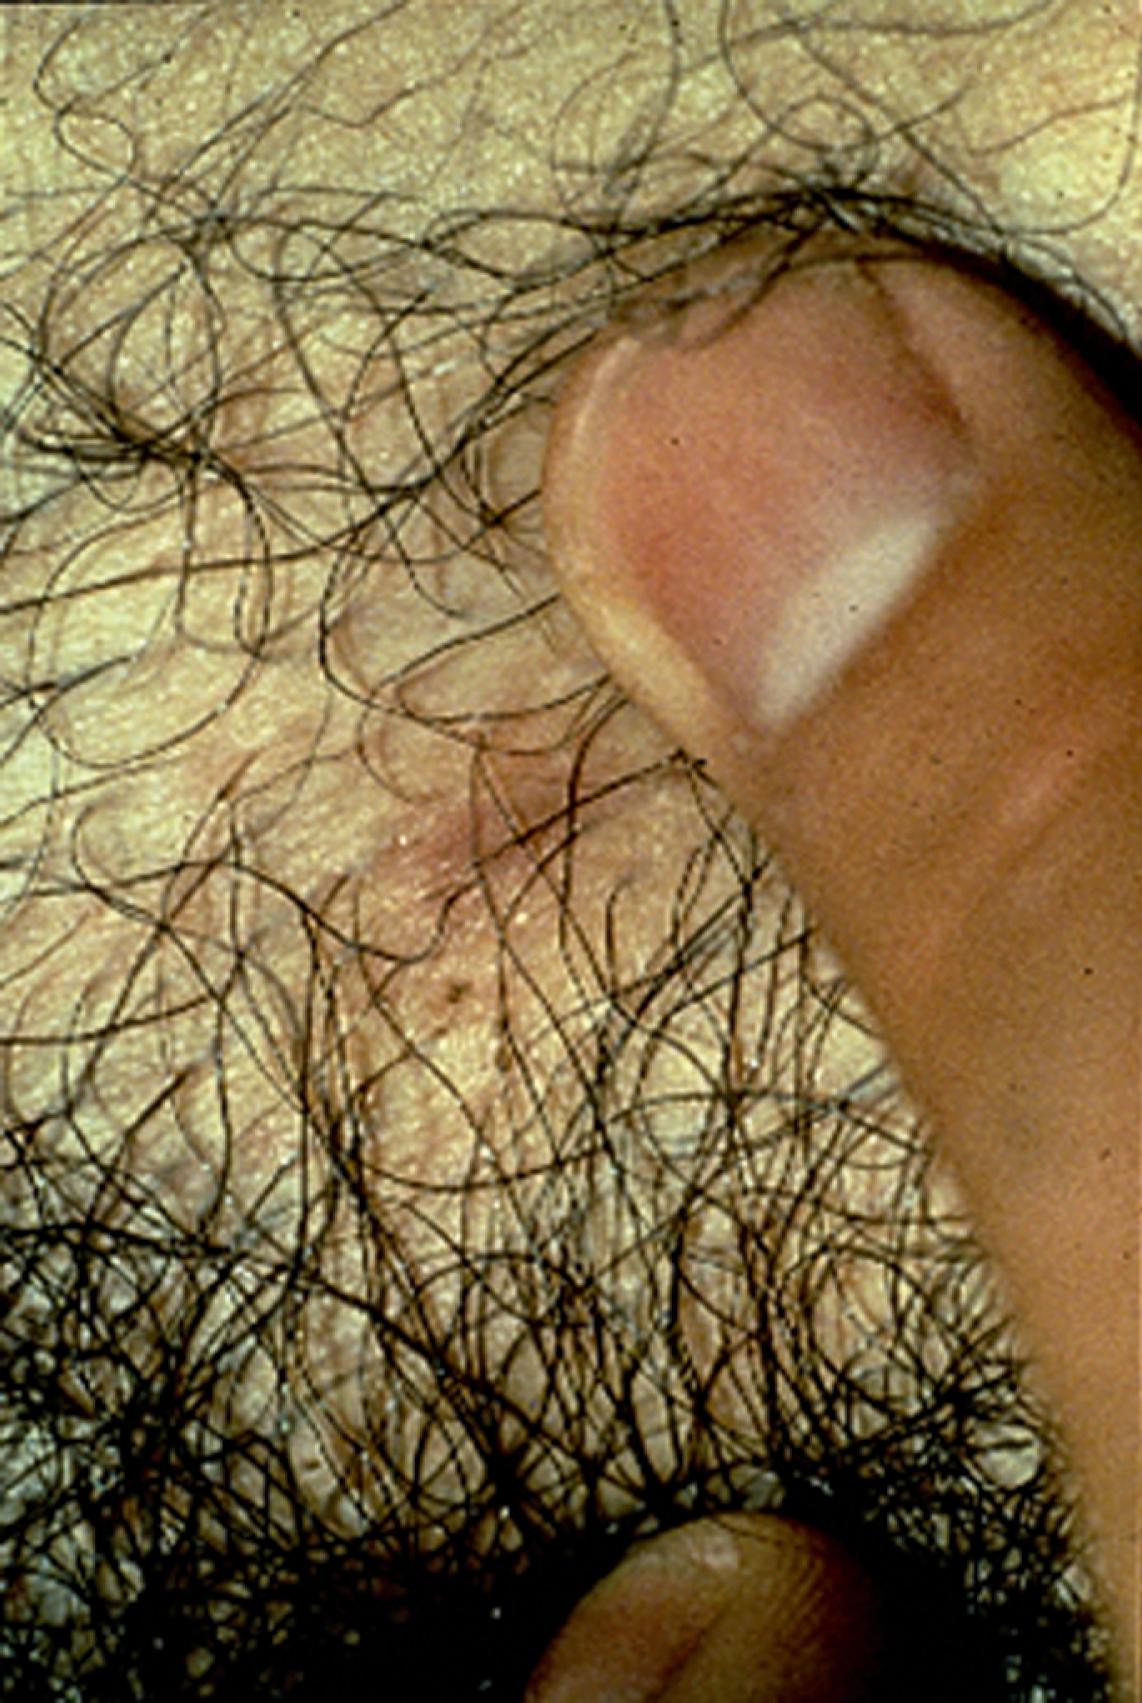 FIGURE 257.1, Maculae cerulae caused by the bite of the body louse.